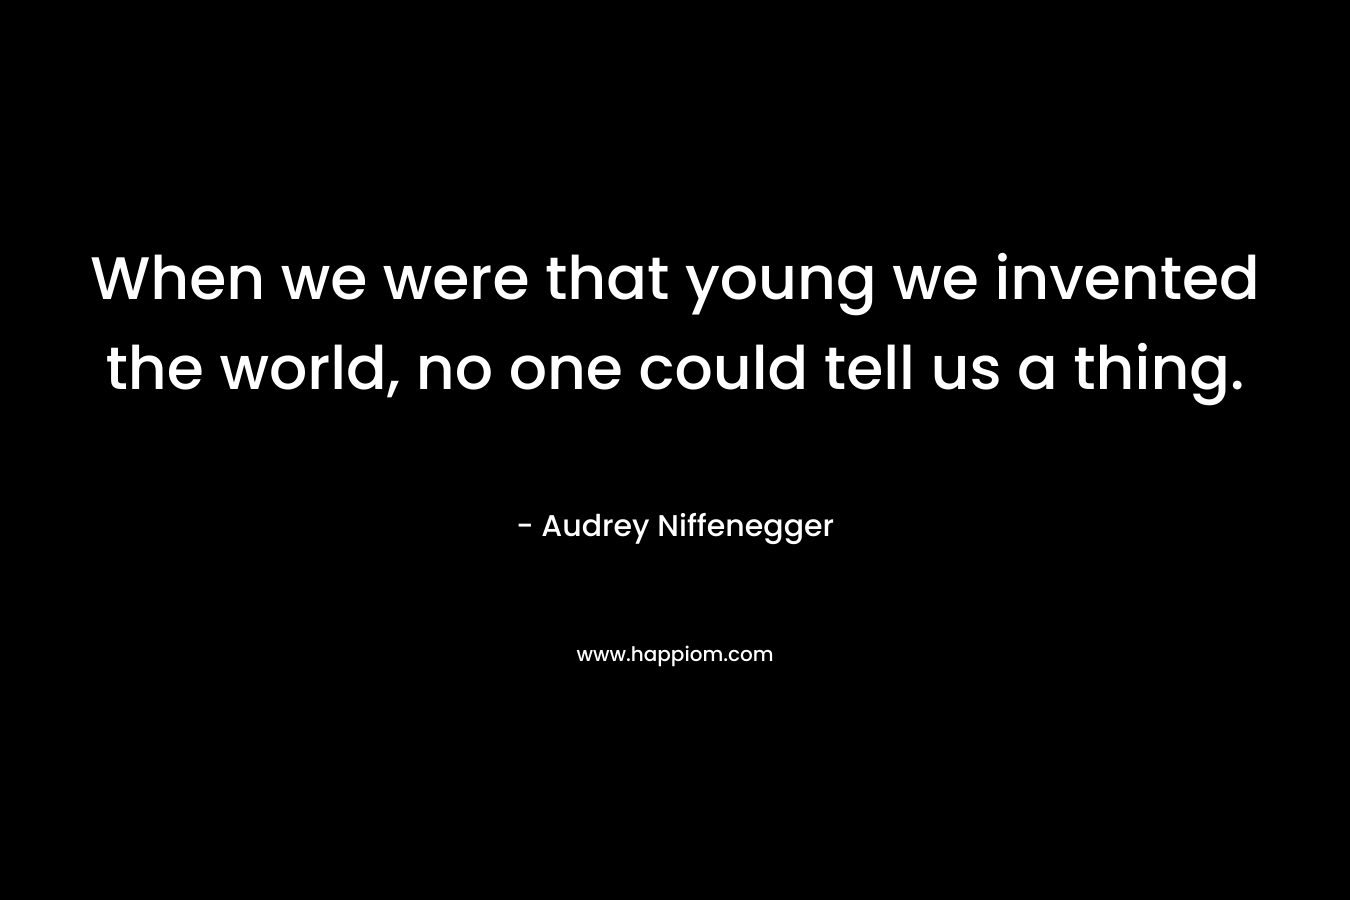 When we were that young we invented the world, no one could tell us a thing.